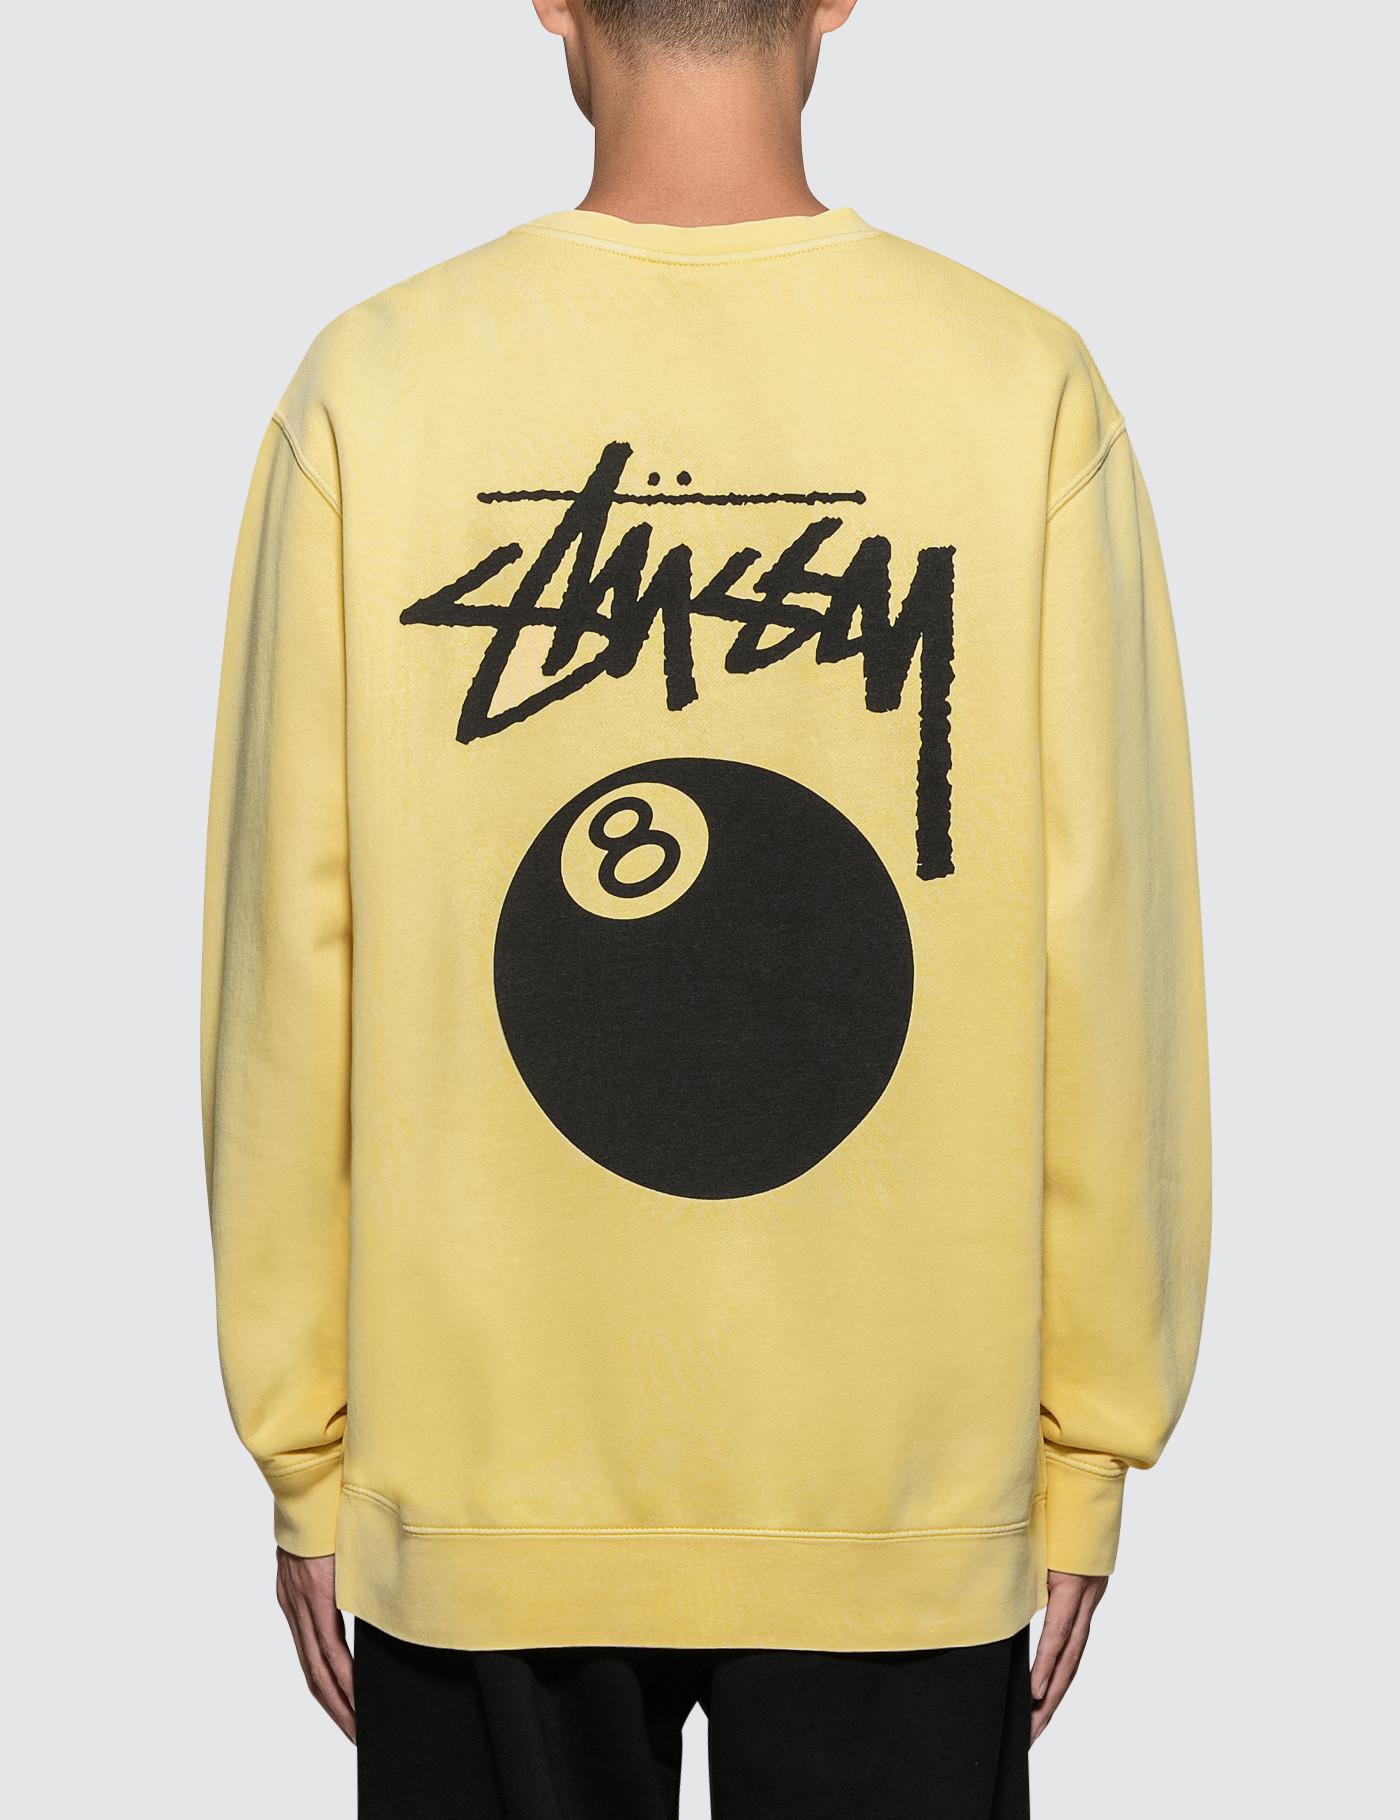 Stussy Cotton 8 Ball Pig. Dyed Crew in Lemon (Yellow) for Men - Lyst